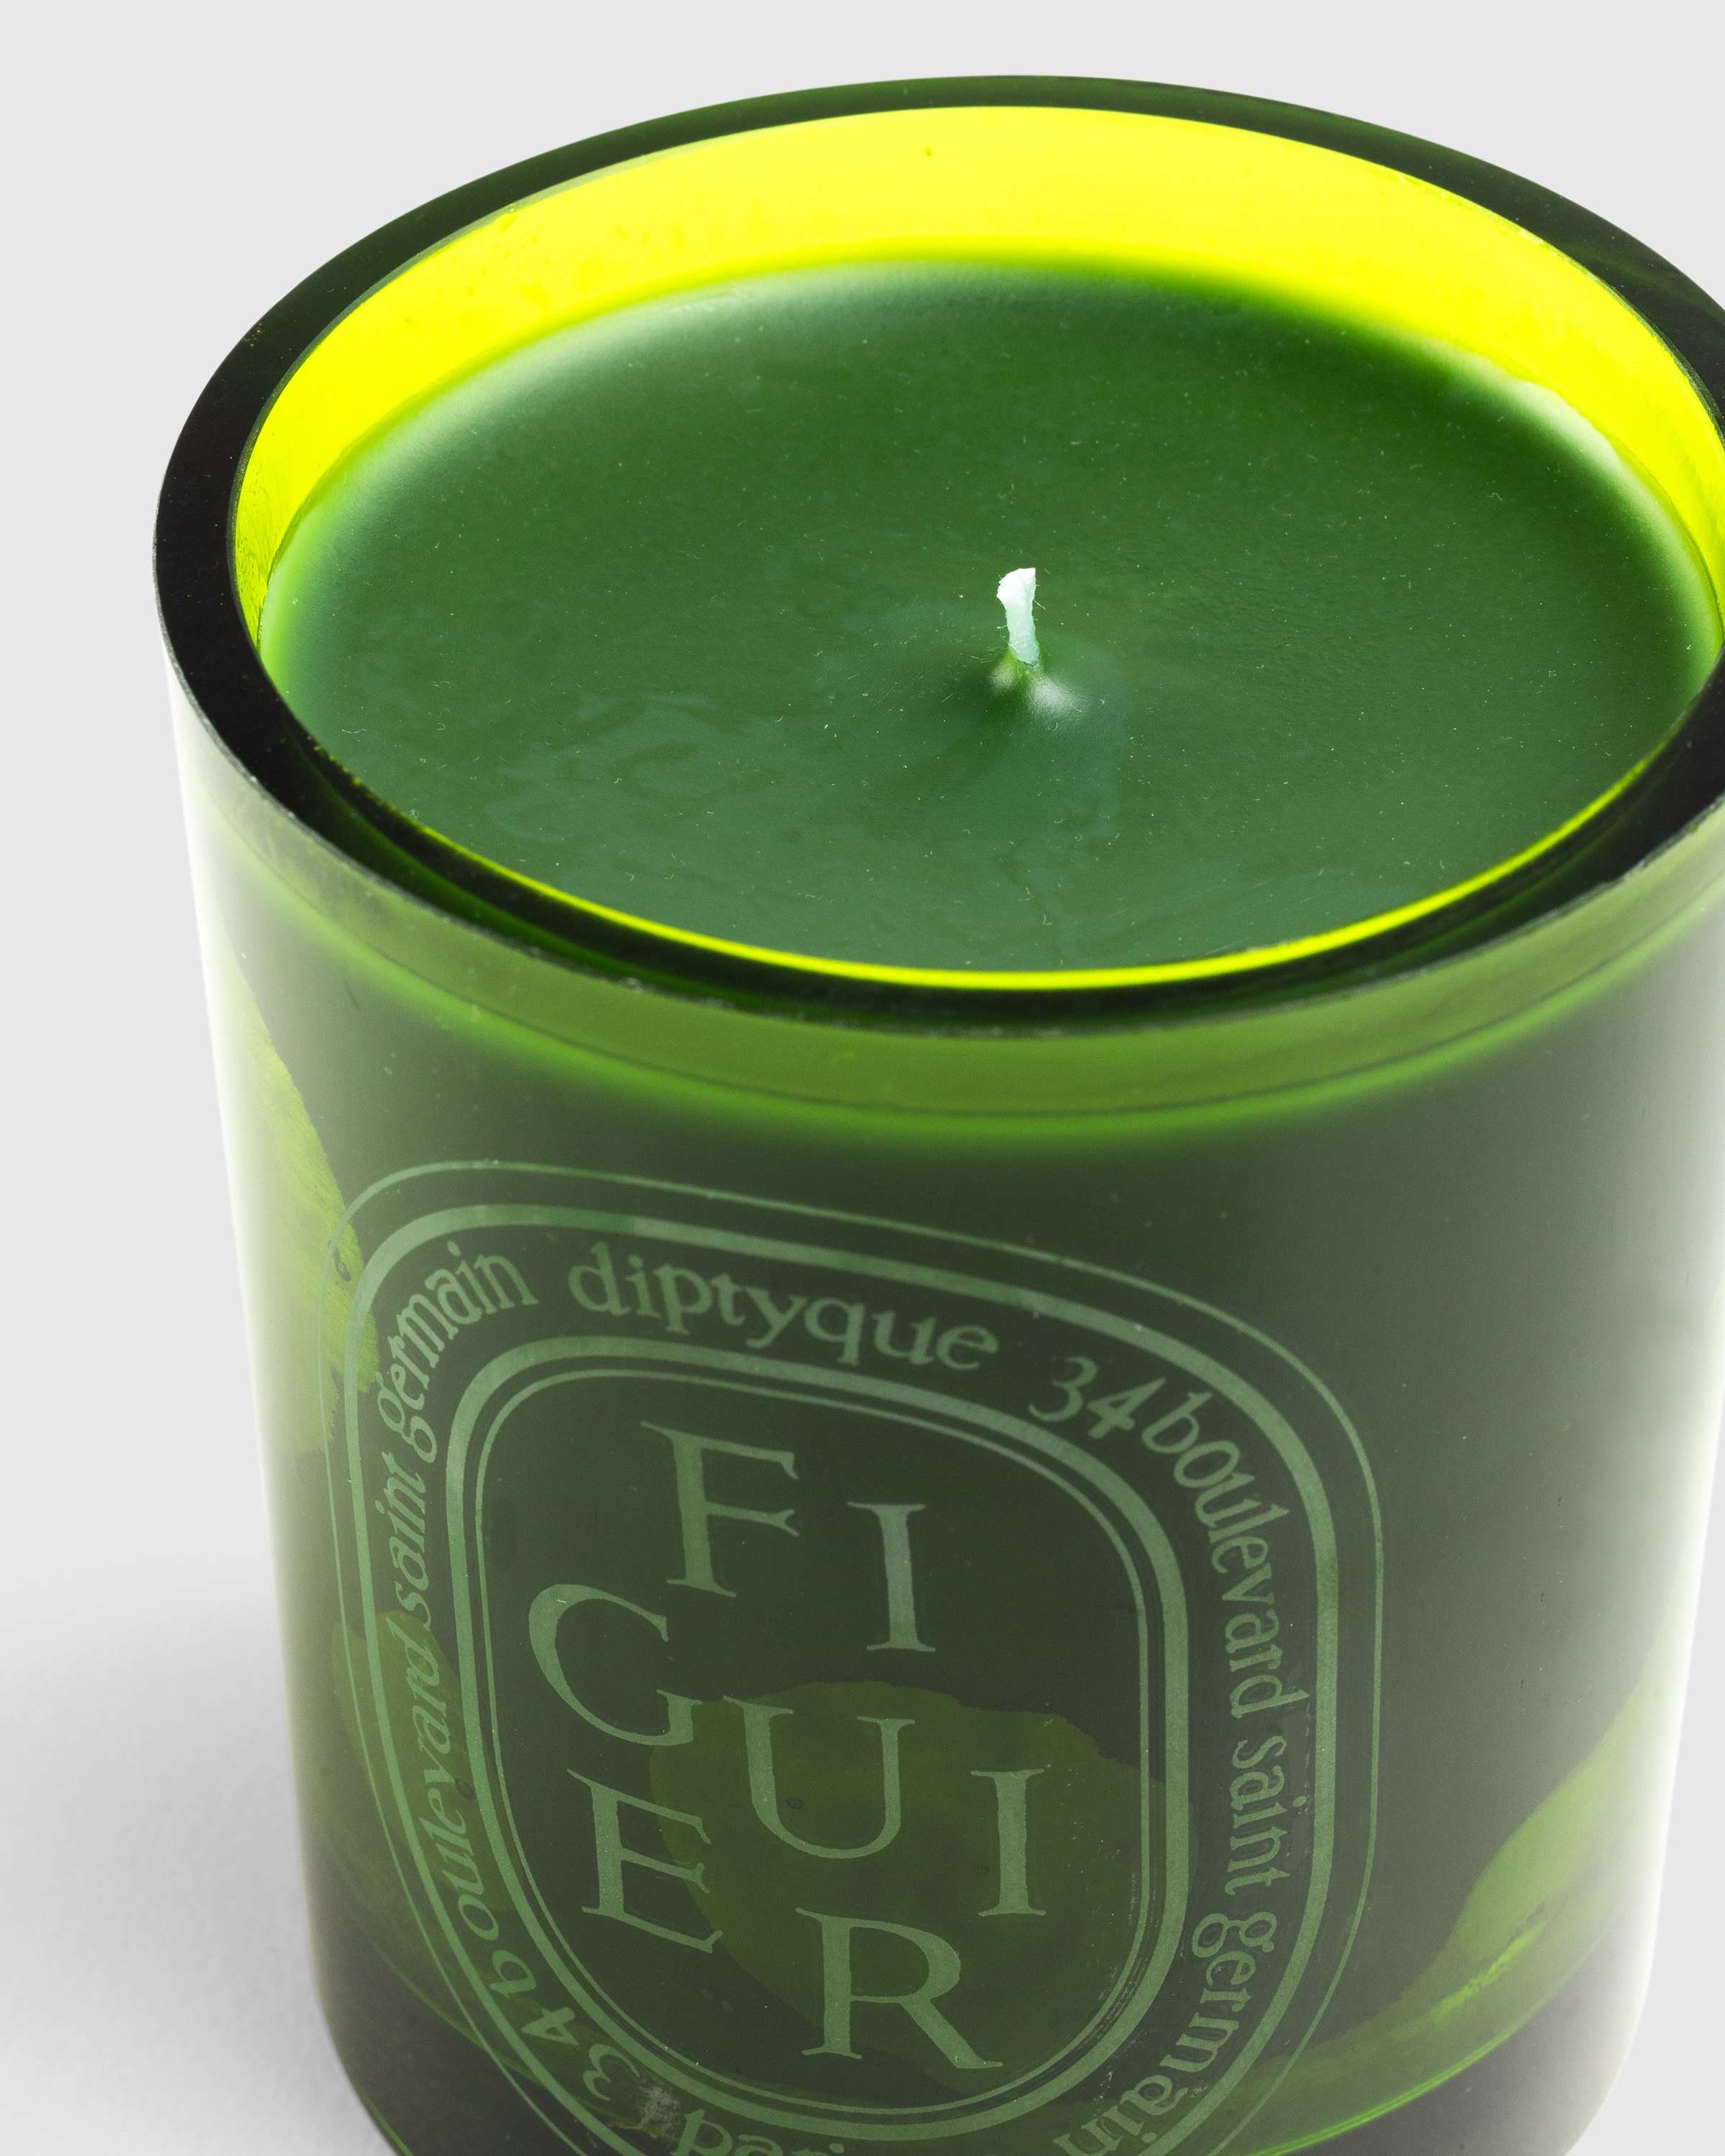 Diptyque – Green Candle Figuier 300g - Candles & Fragrances - Green - Image 2